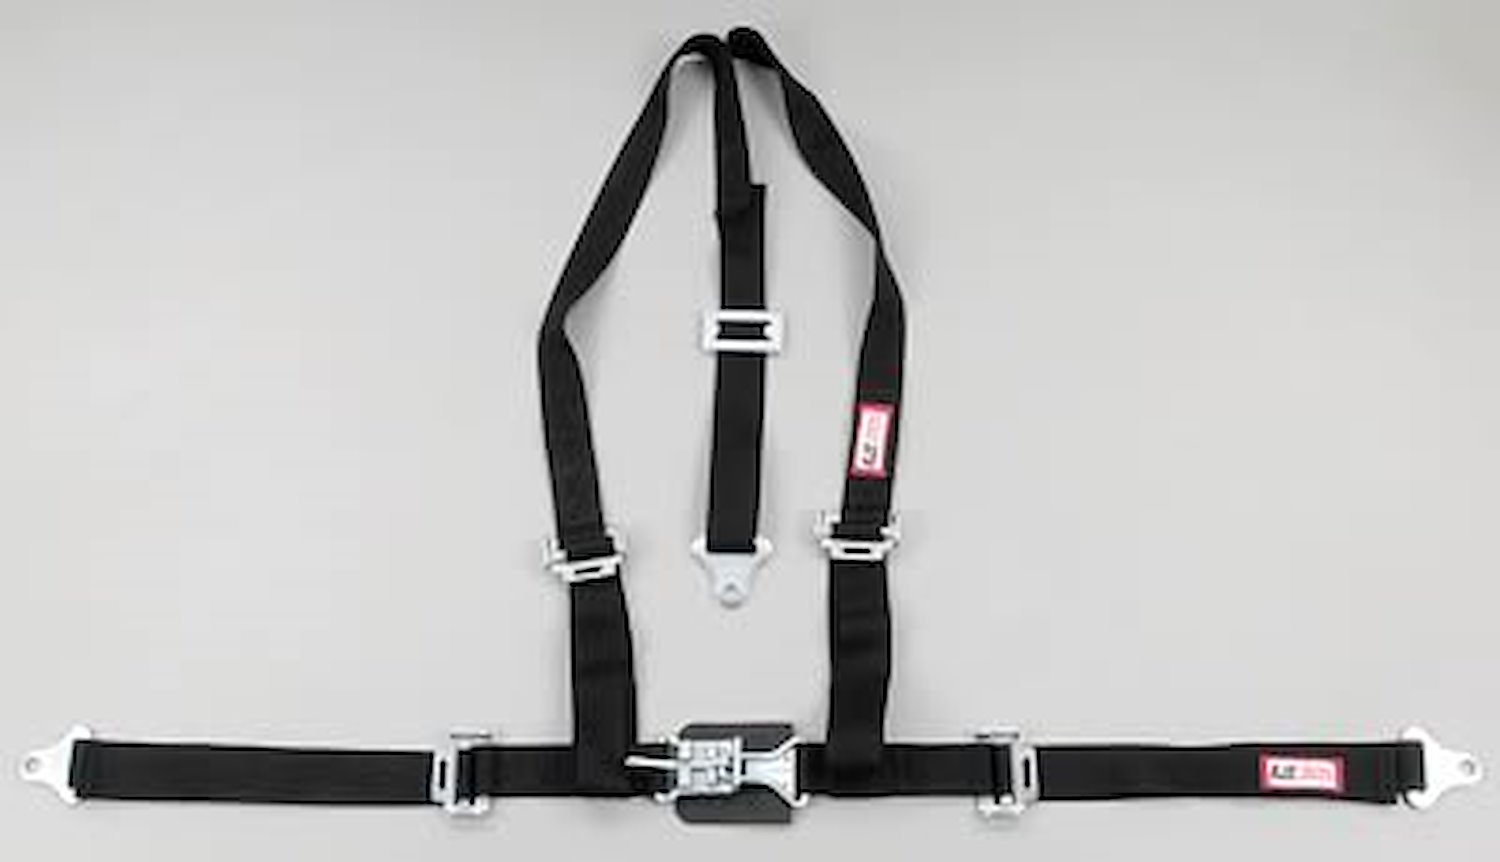 NON-SFI L&L HARNESS 3 PULL DOWN Lap Belt SNAP SEWN IN 2 S.H. Individual FLOOR Mount WRAP/SNAP PURPLE